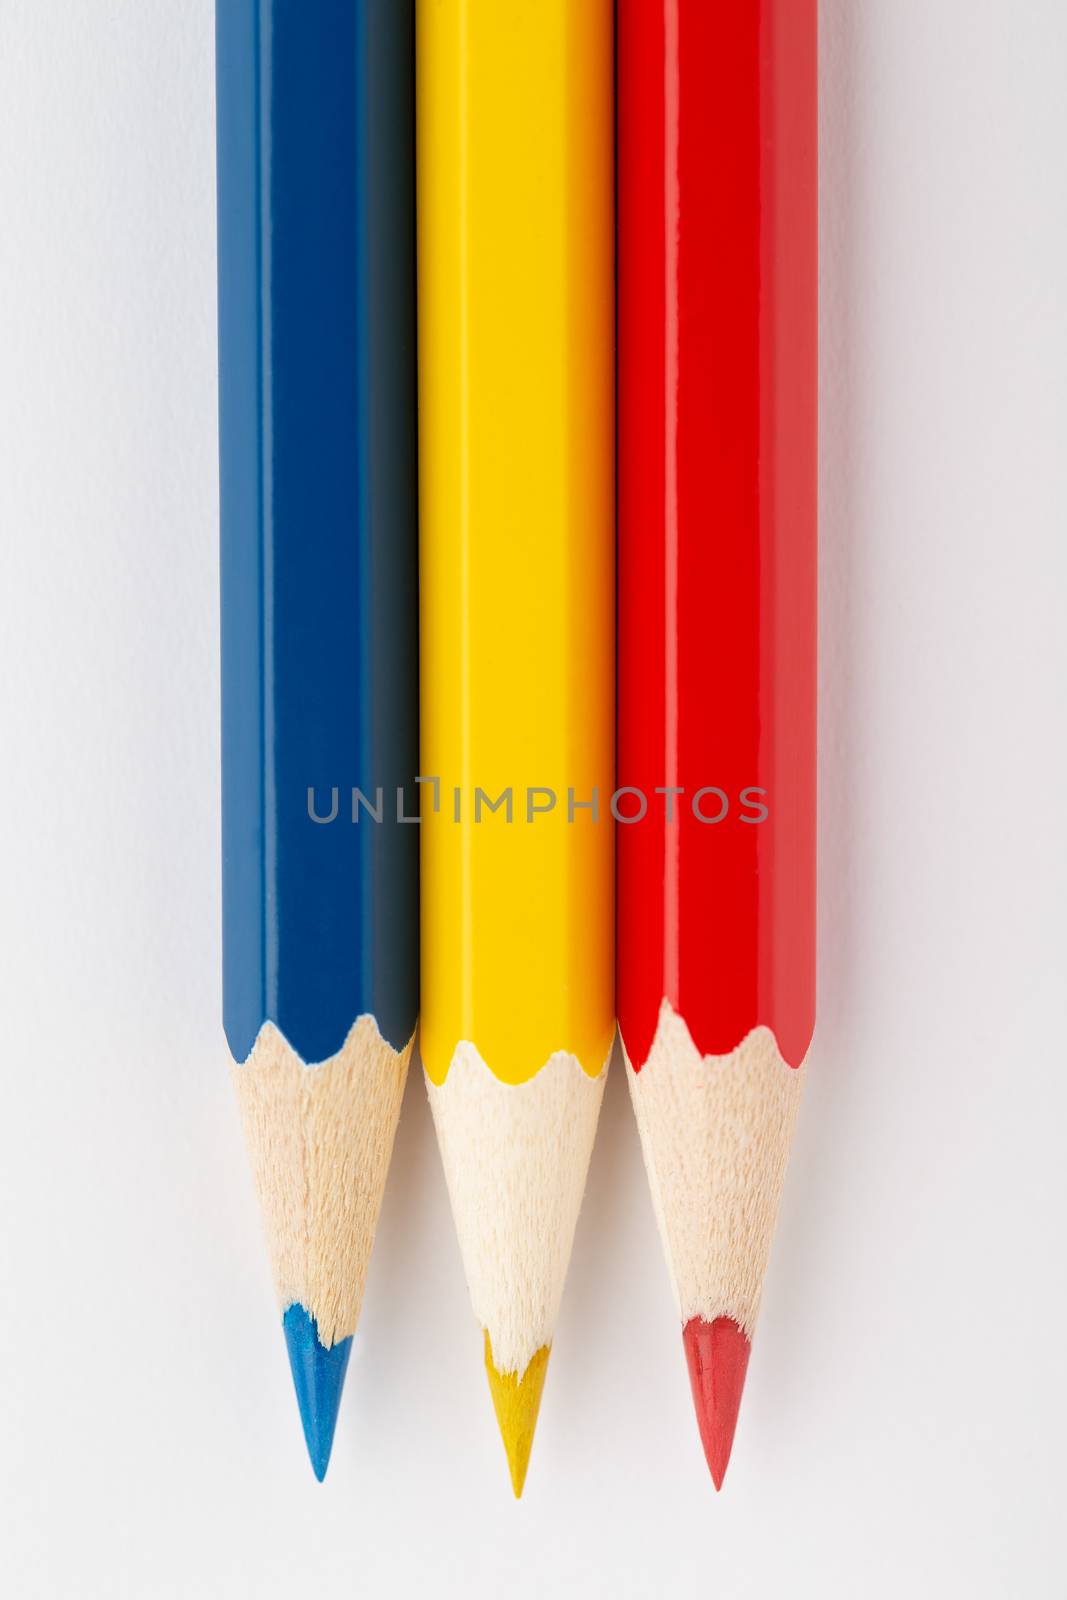 State flags made of colorful wooden pencils Romania by 25ehaag6